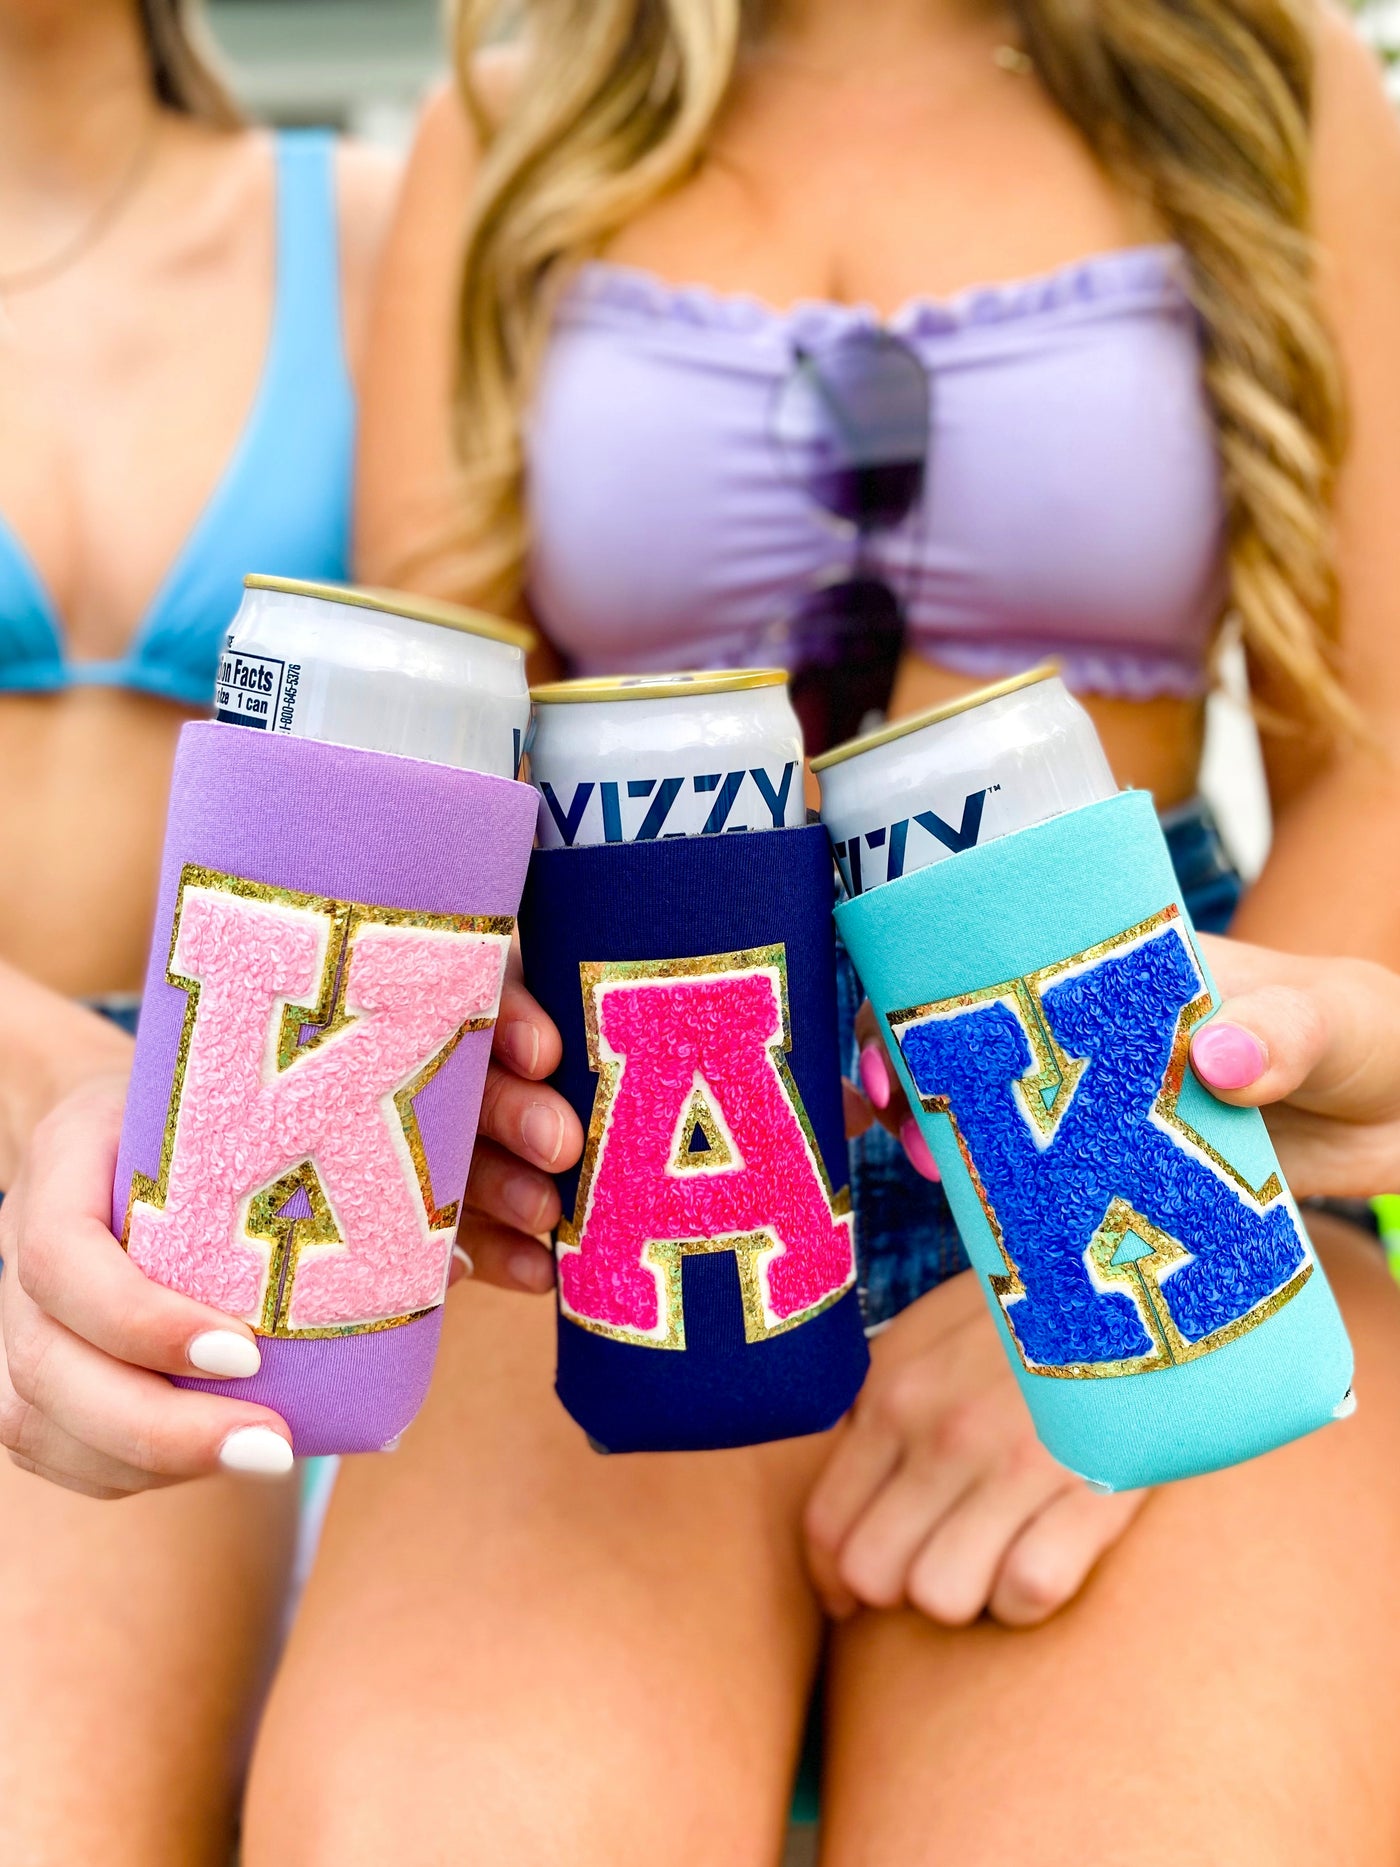 Letter Patch Slim Can Koozie